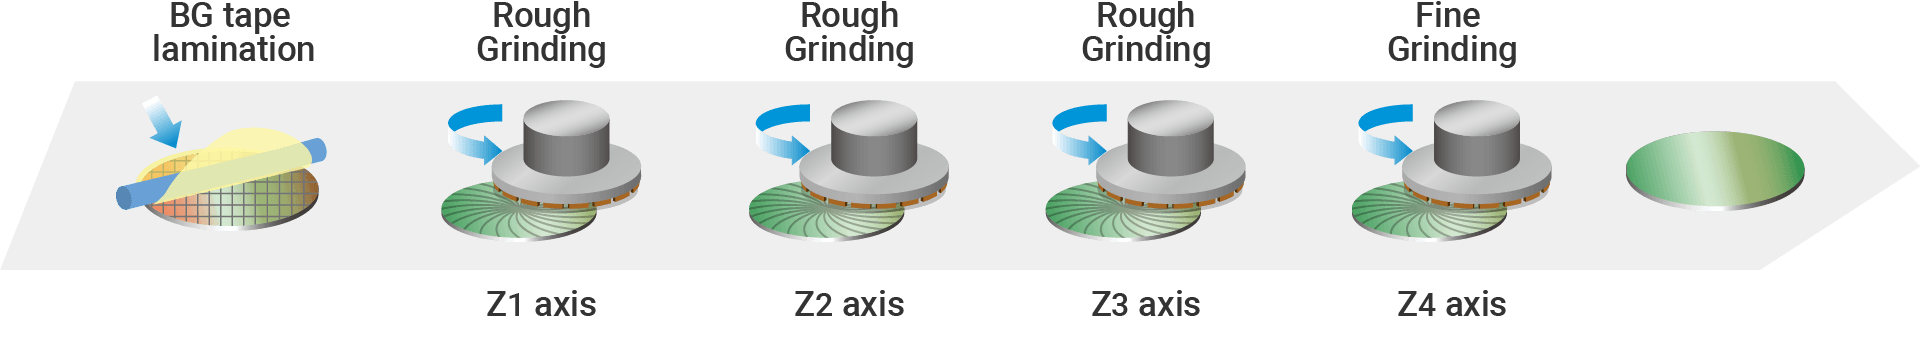 Productivity Improvement Through 4-axis Processing